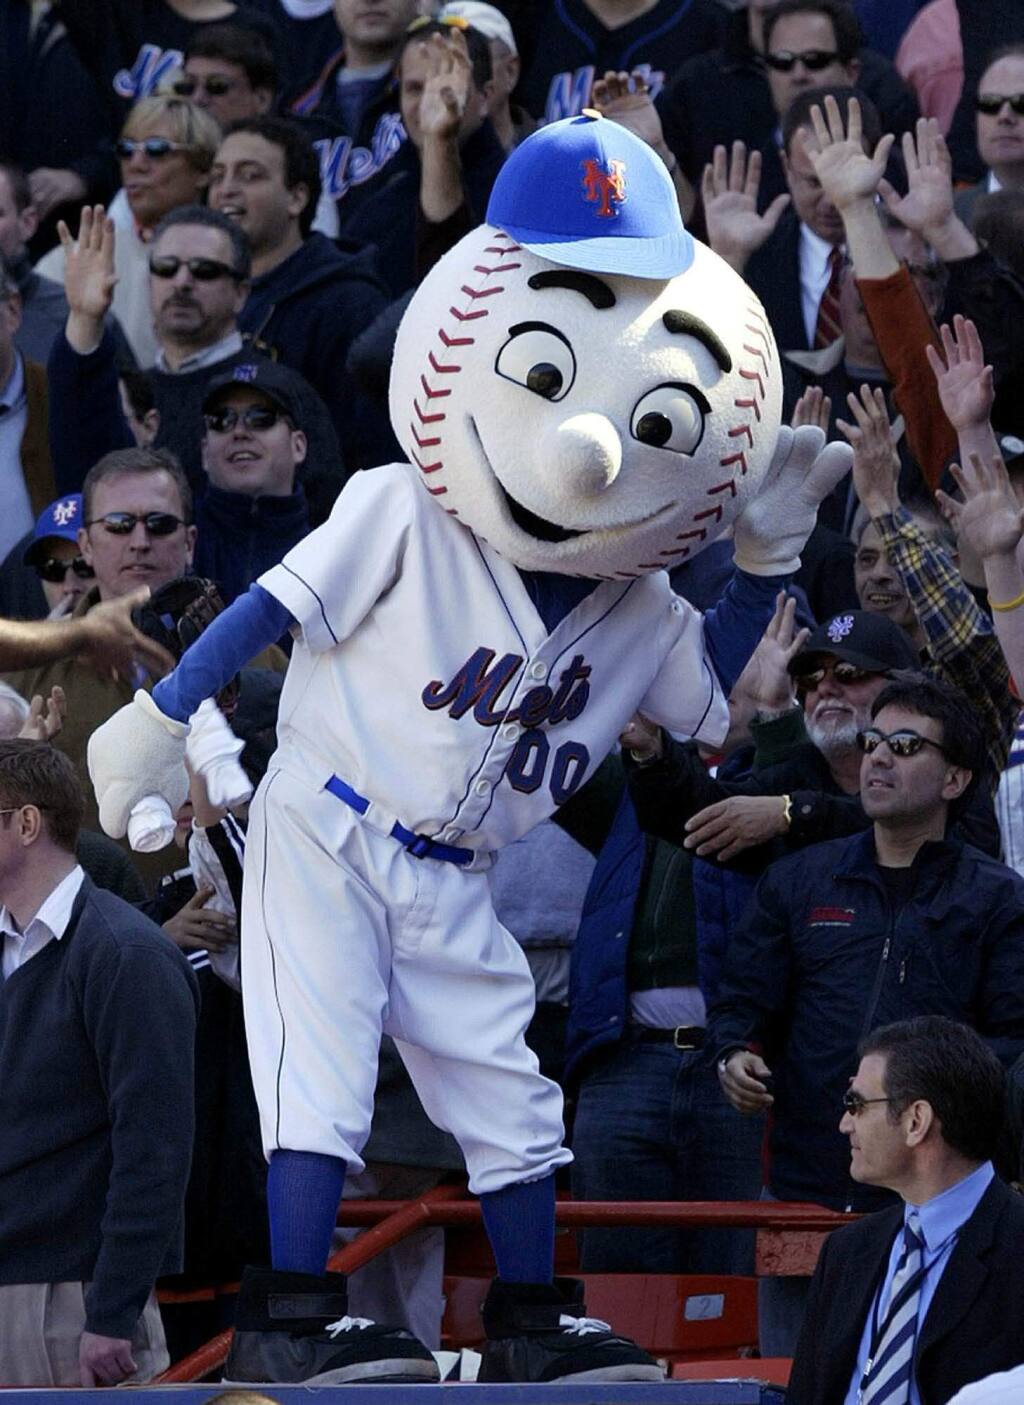 Mr. Met gives fan the finger, employee out as team mascot